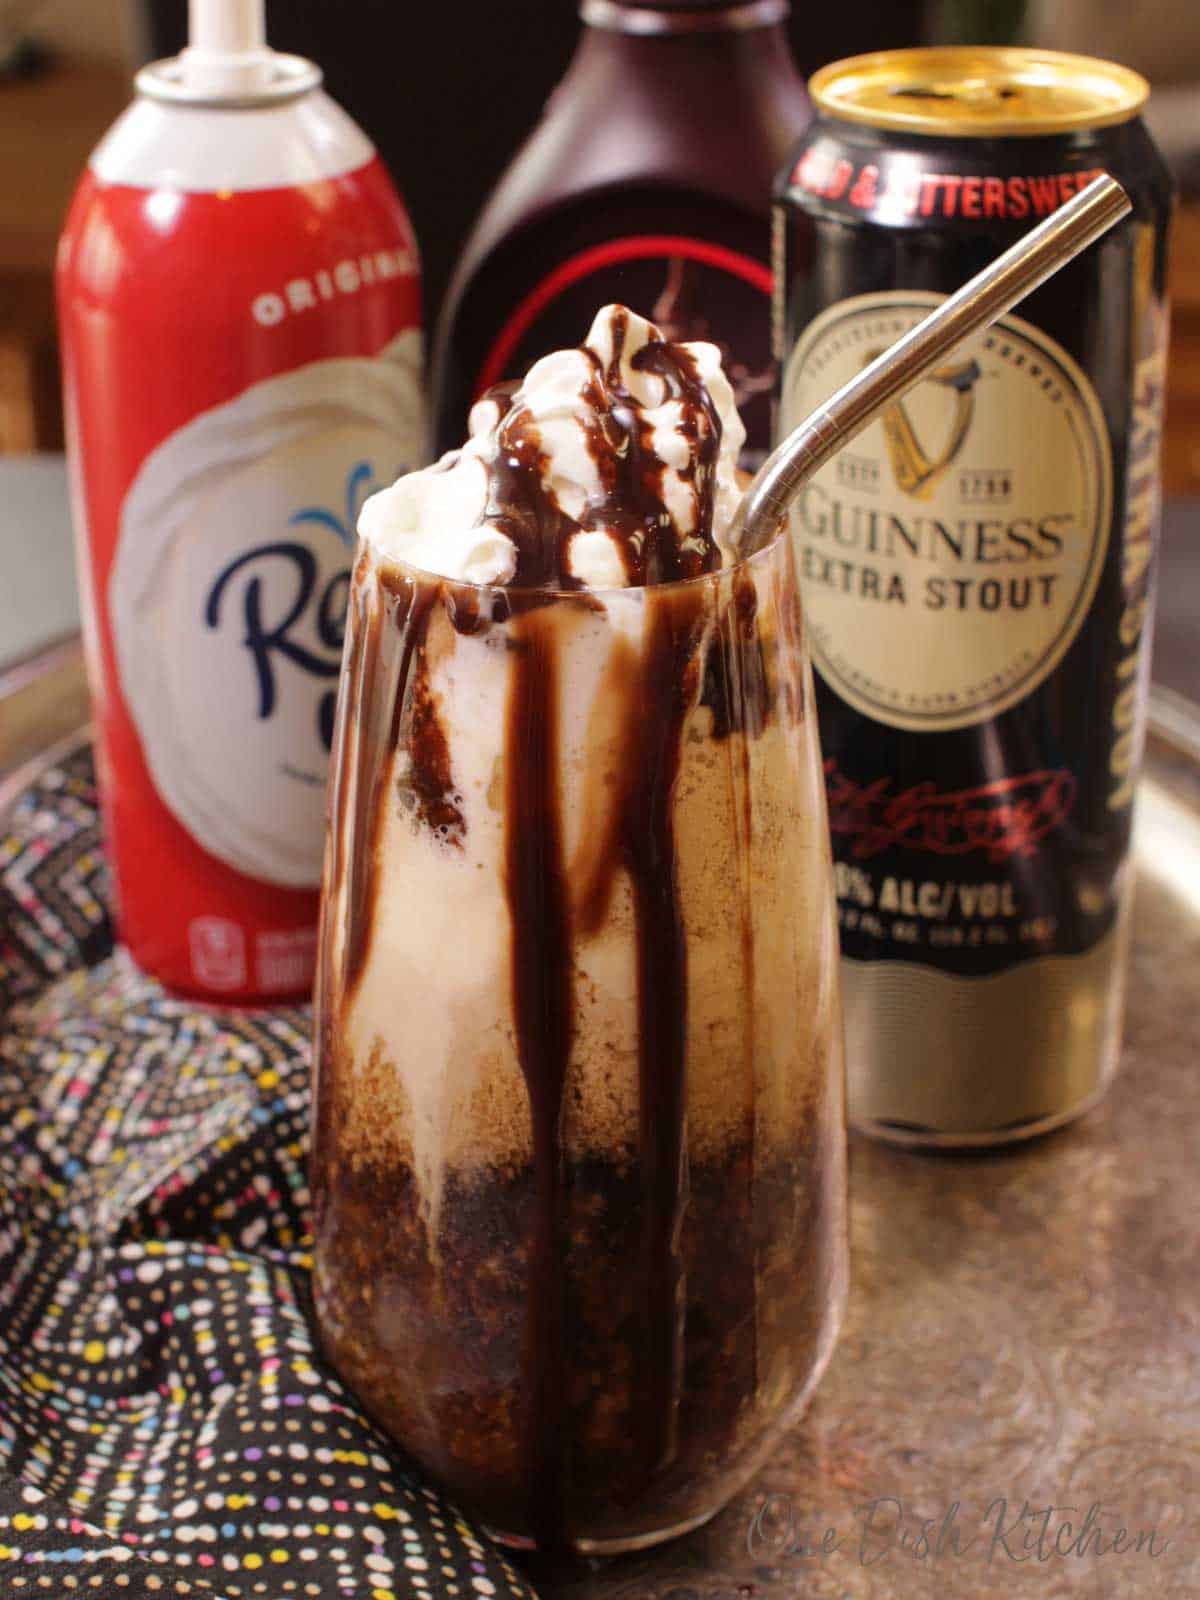 A Guinness Float made with vanilla ice cream and topped with a metal straw, whipped cream and chocolate syrup on a metal tray with a can of whipped cream, chocolate syrup, and a can of Guinness Stout